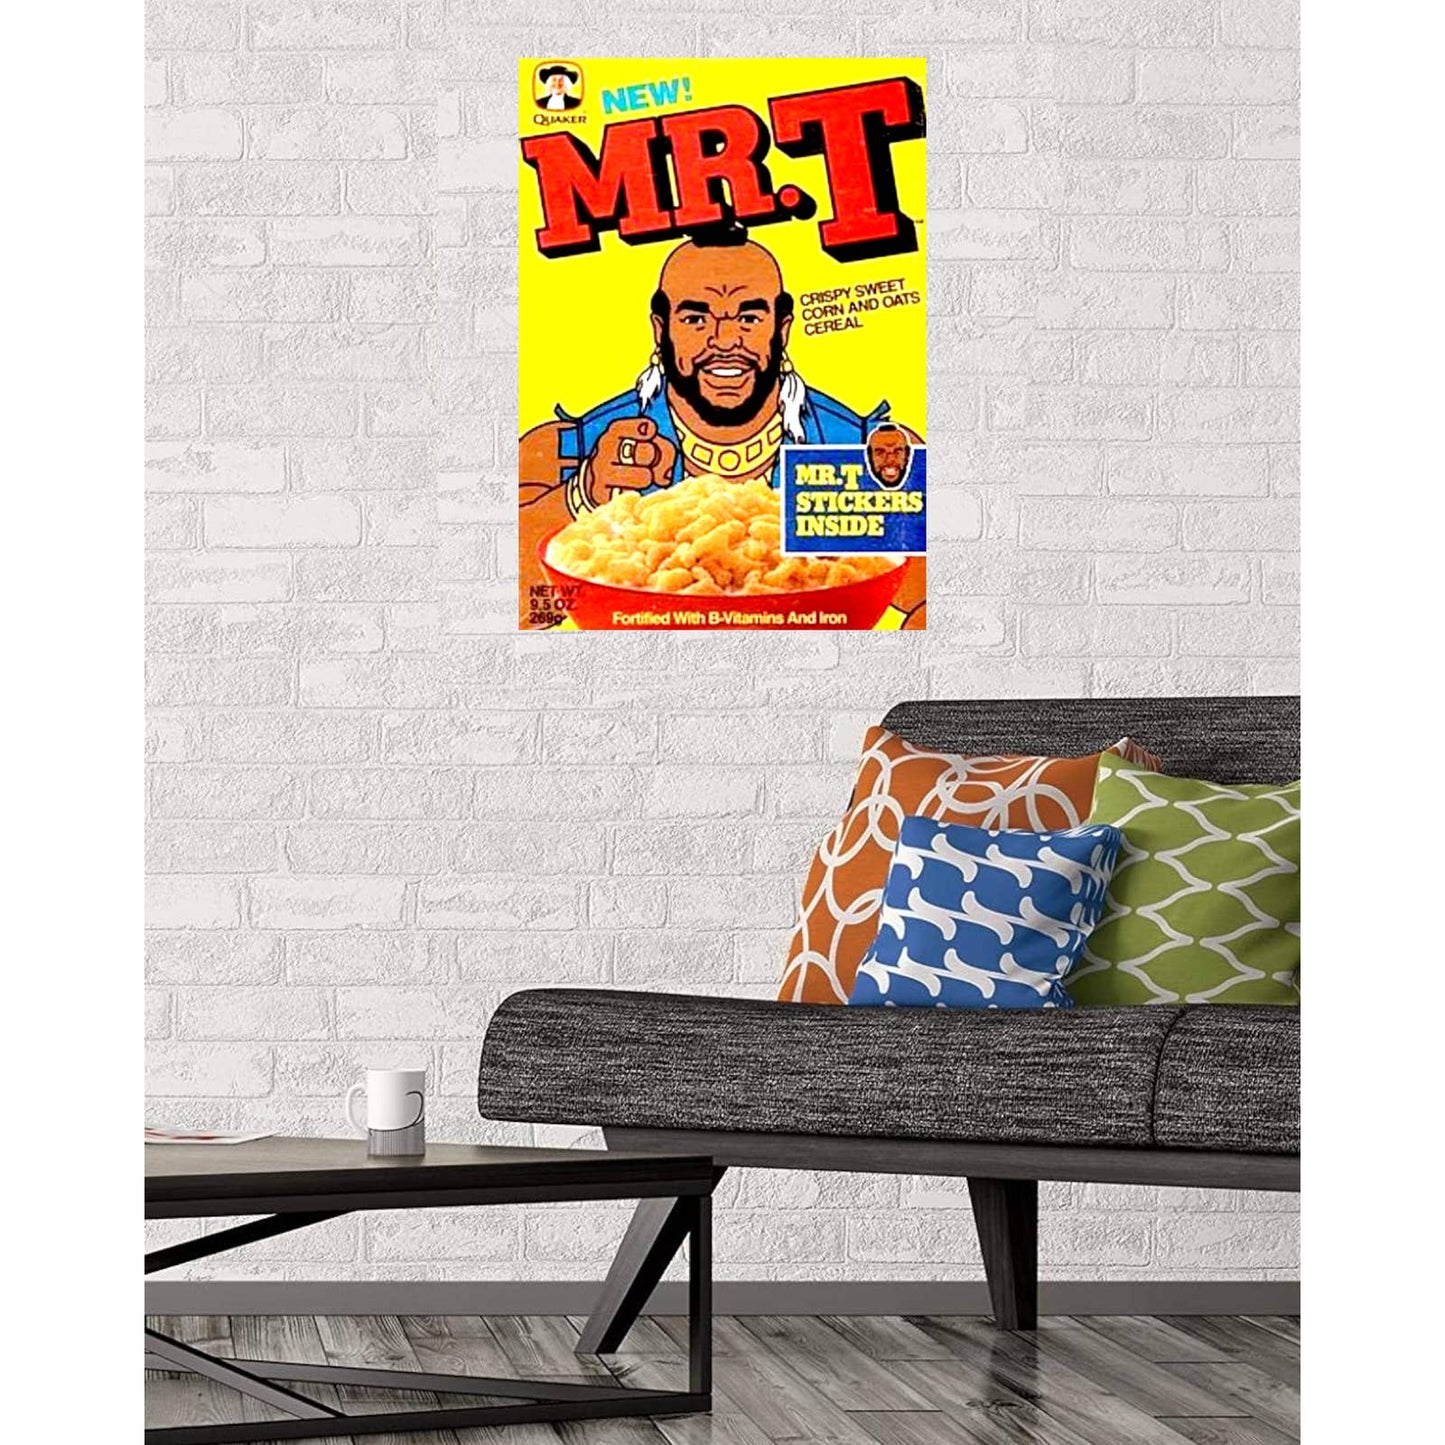 Mr. T  Cereal Box Cover Poster Print Wall Art 16"x24"